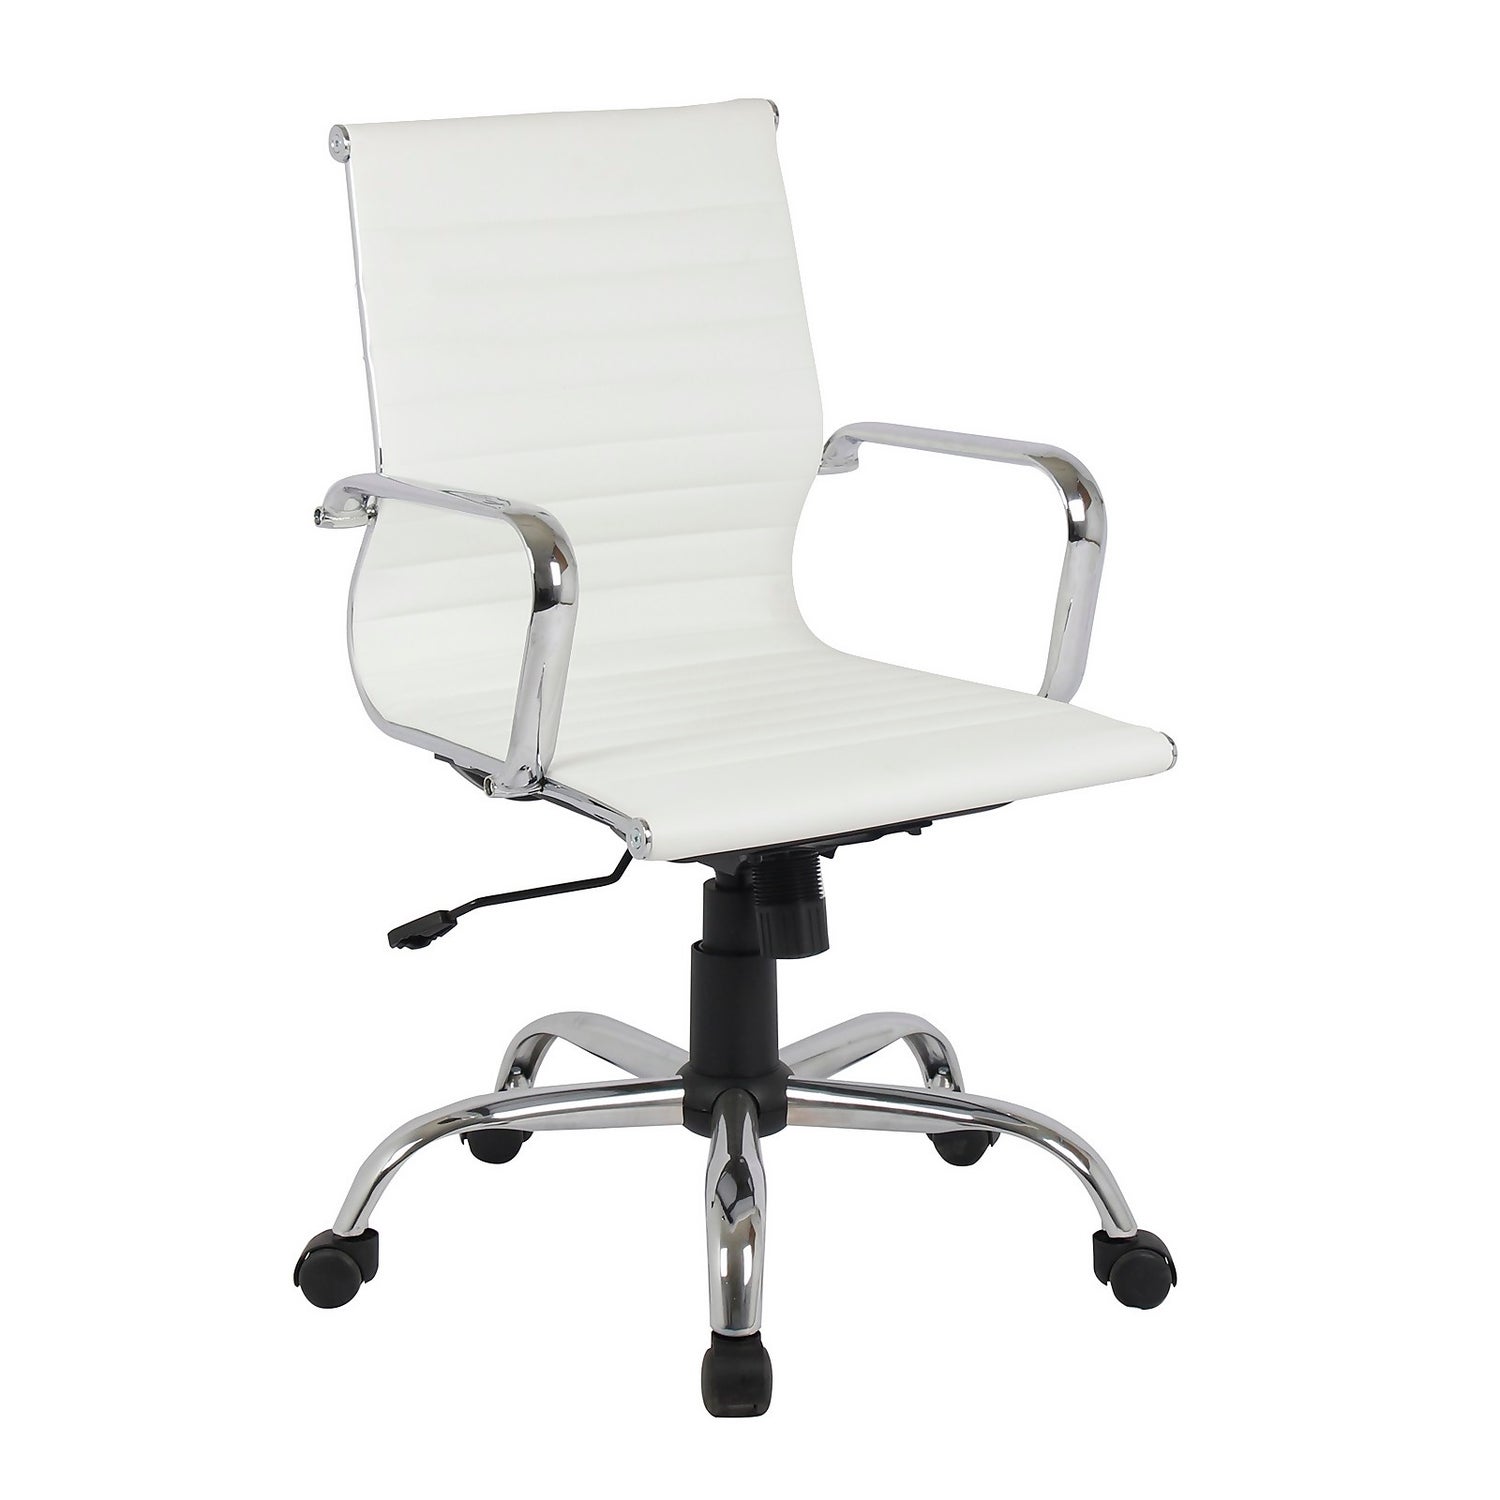 Dave Office Chair White Faux Leather, White Leather Executive Chair